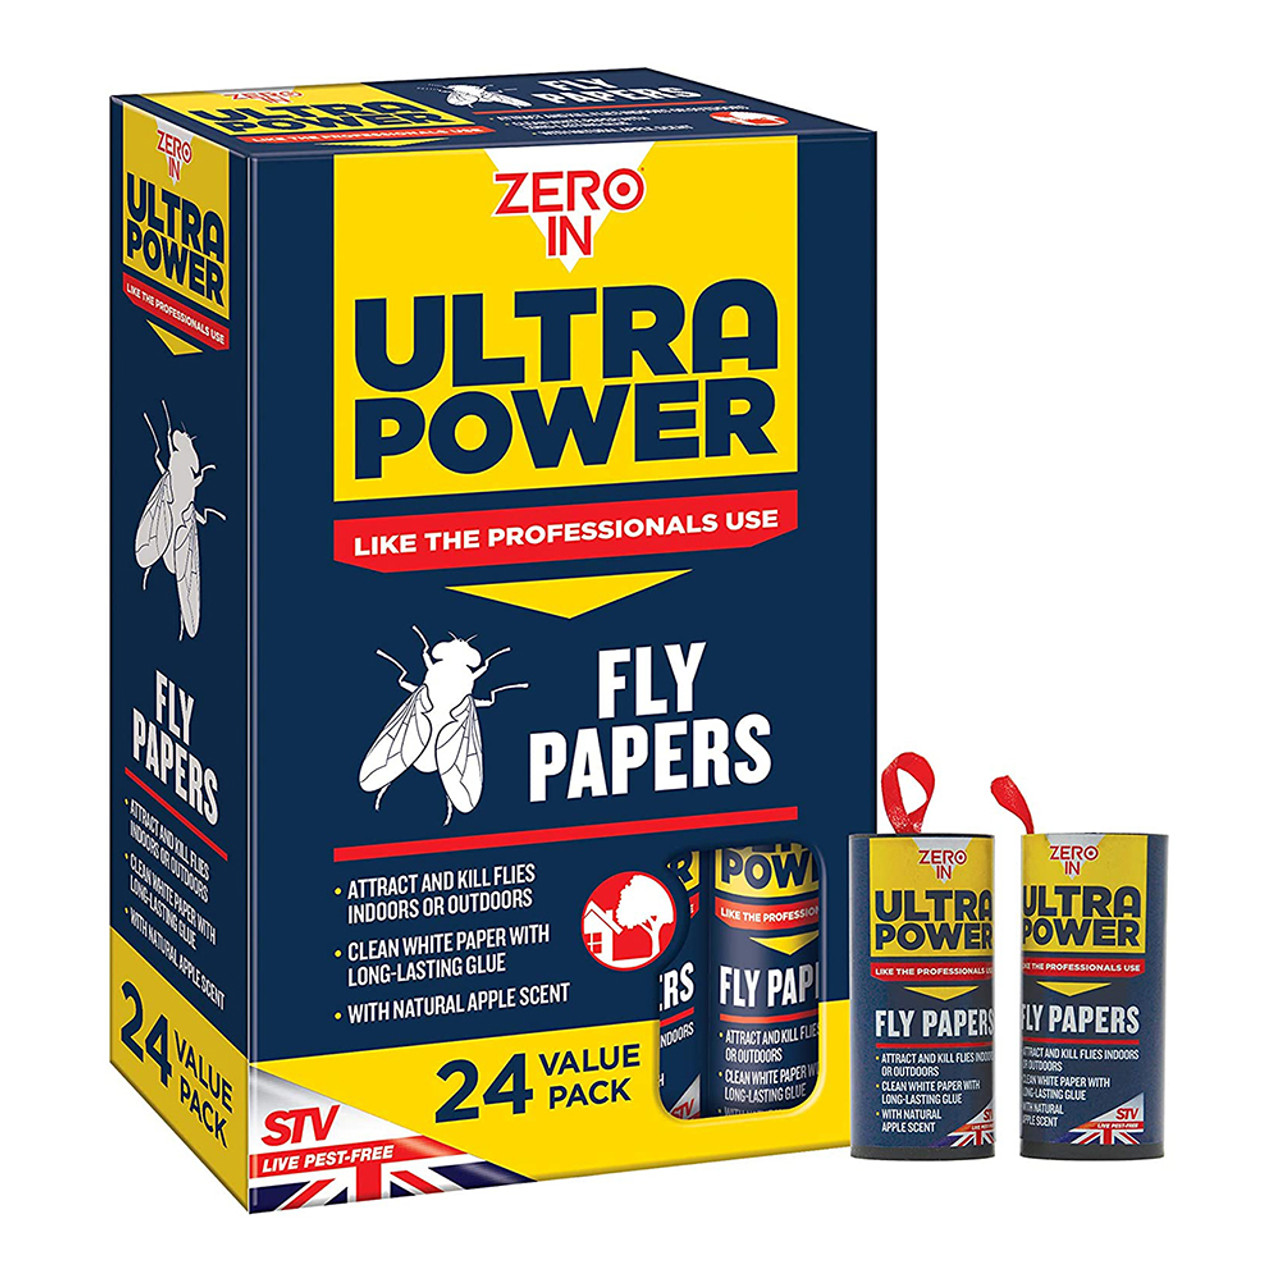 https://cdn11.bigcommerce.com/s-lmuttm1jiv/images/stencil/1280x1280/products/401/1395/Zero-In-Ultra-Power-Fly-Papers-Poison-free-Kills-Insects-in-Homes-Value-Pack-24__56731.1592950458.jpg?c=2